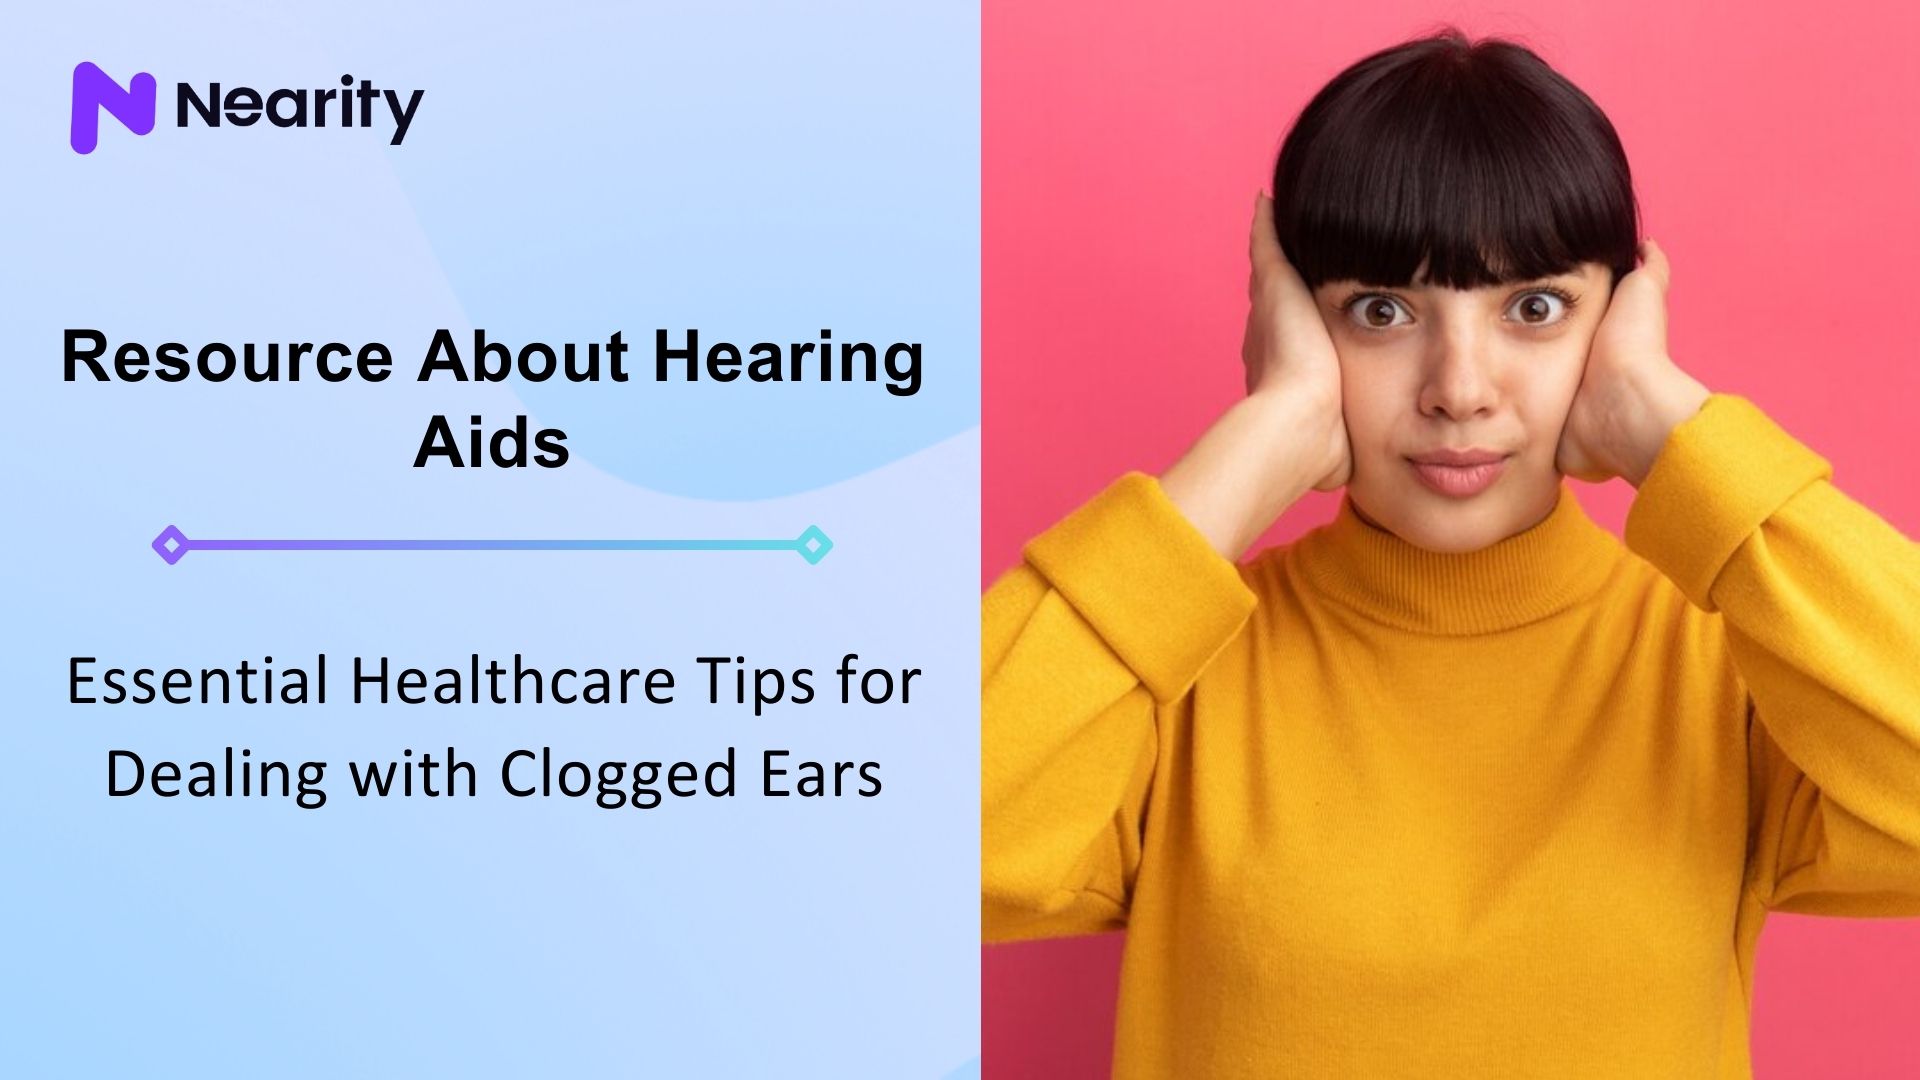 Essential Healthcare Tips for Dealing with Clogged Ears